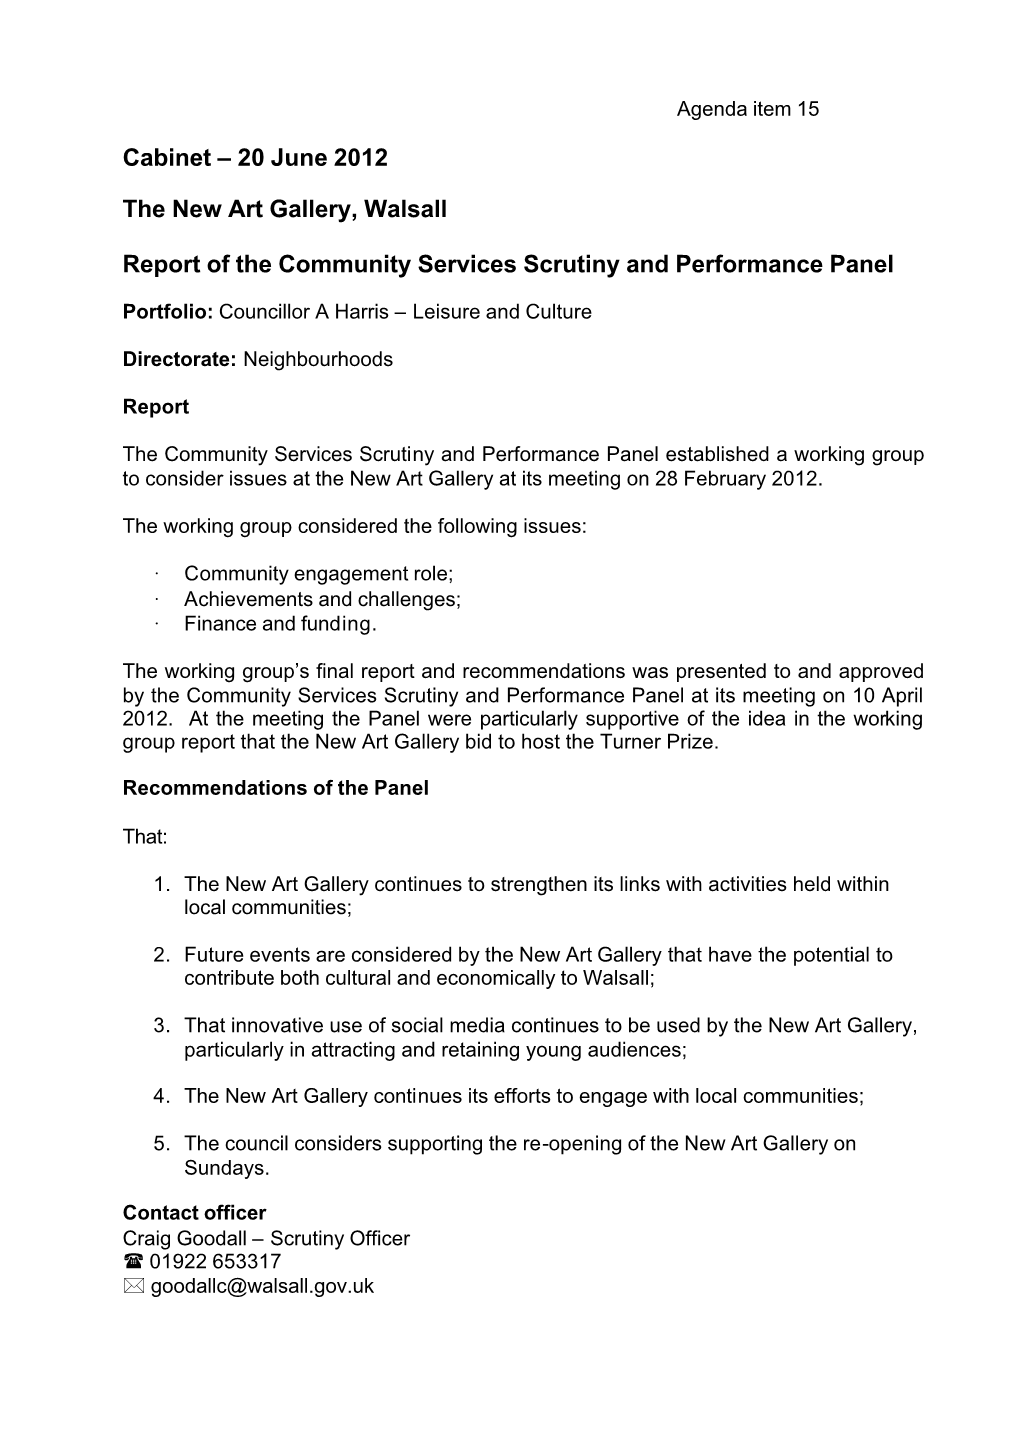 20 June 2012 the New Art Gallery, Walsall Report of the Community Services Scrutiny and Performance Panel